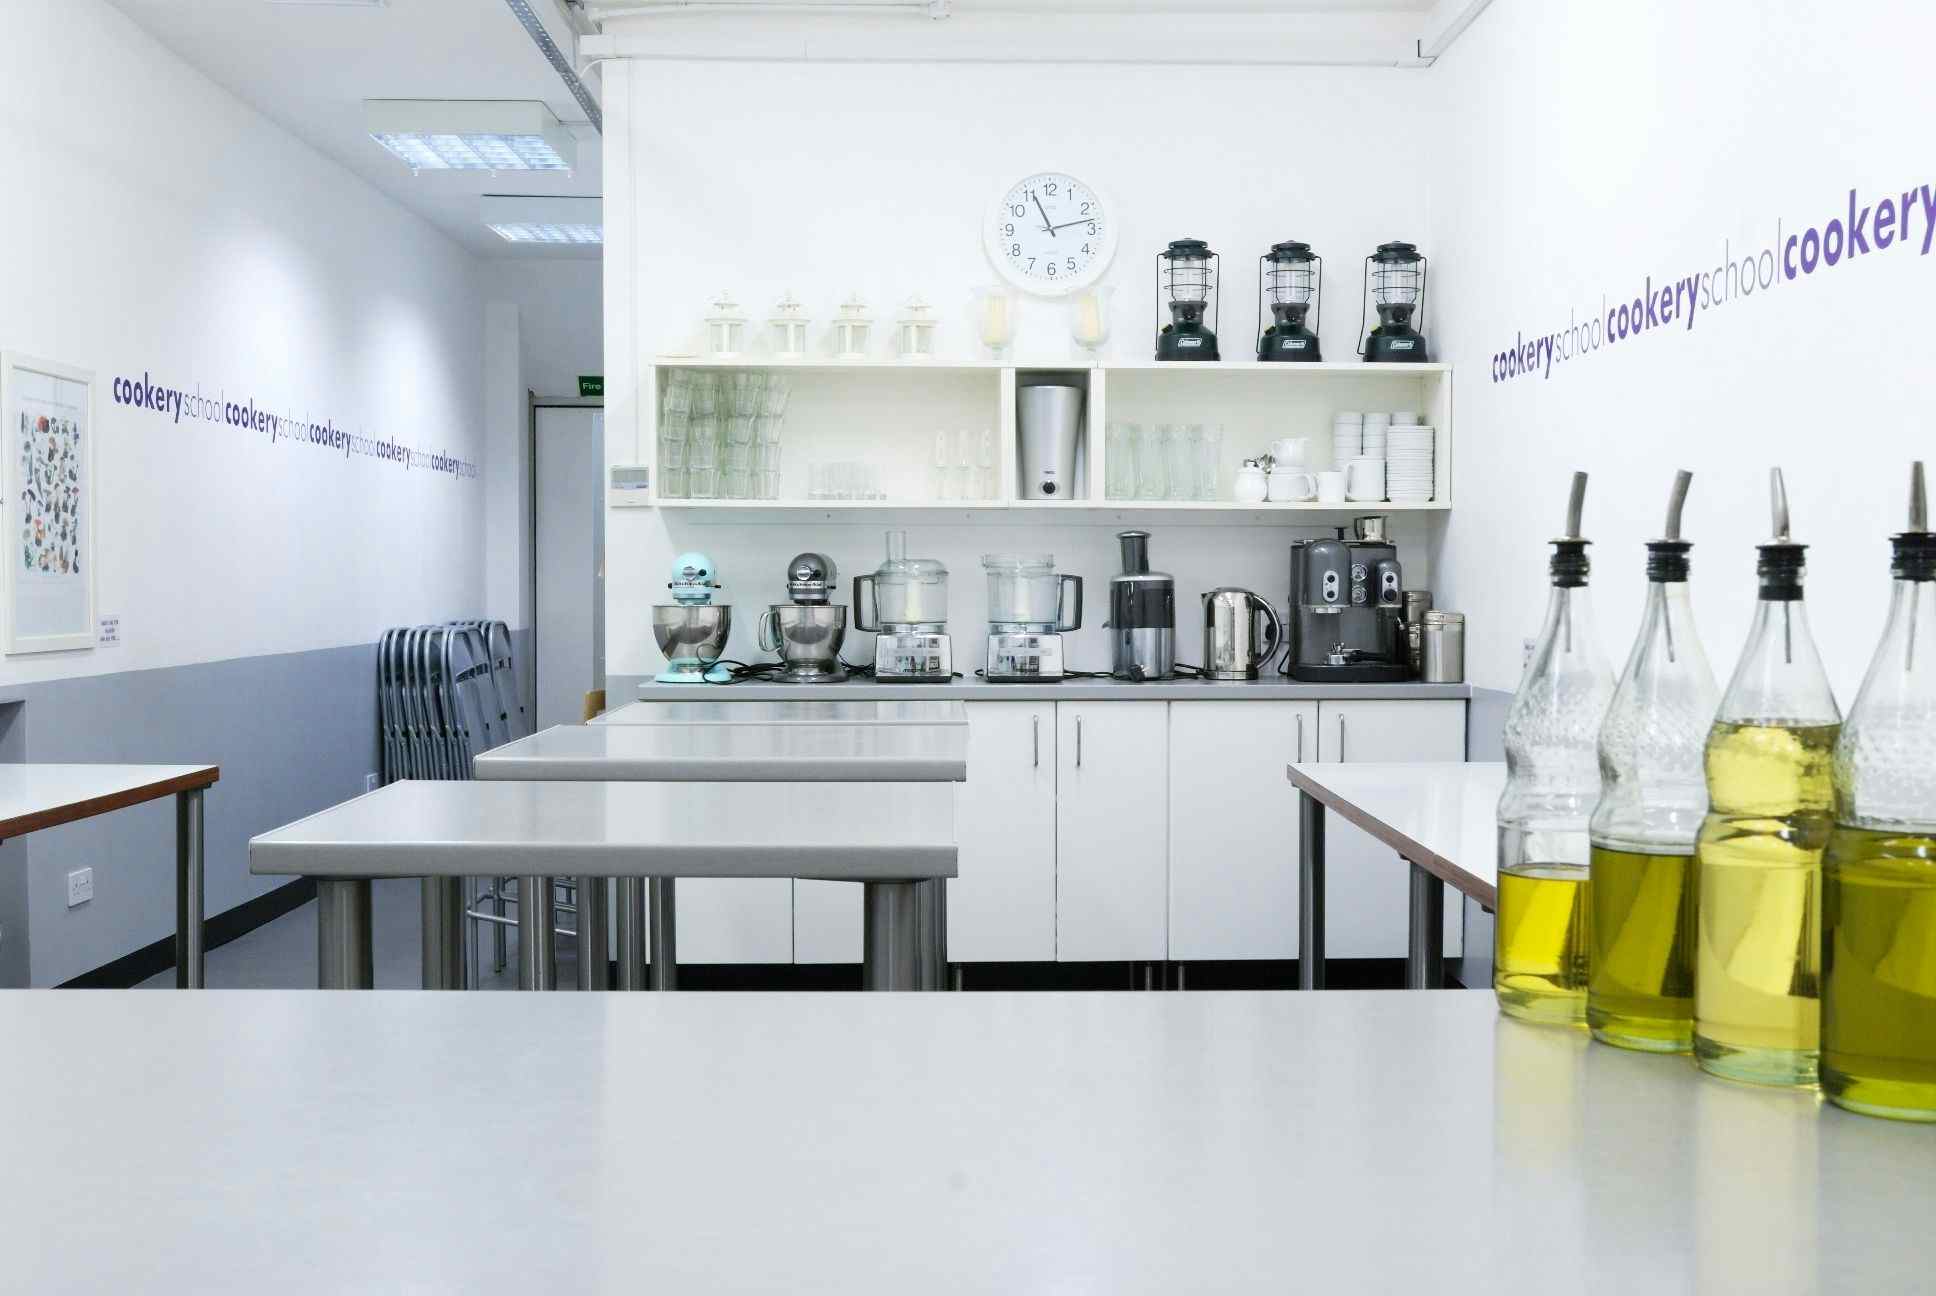 Corporate Cookery, Cookery School at Little Portland Street